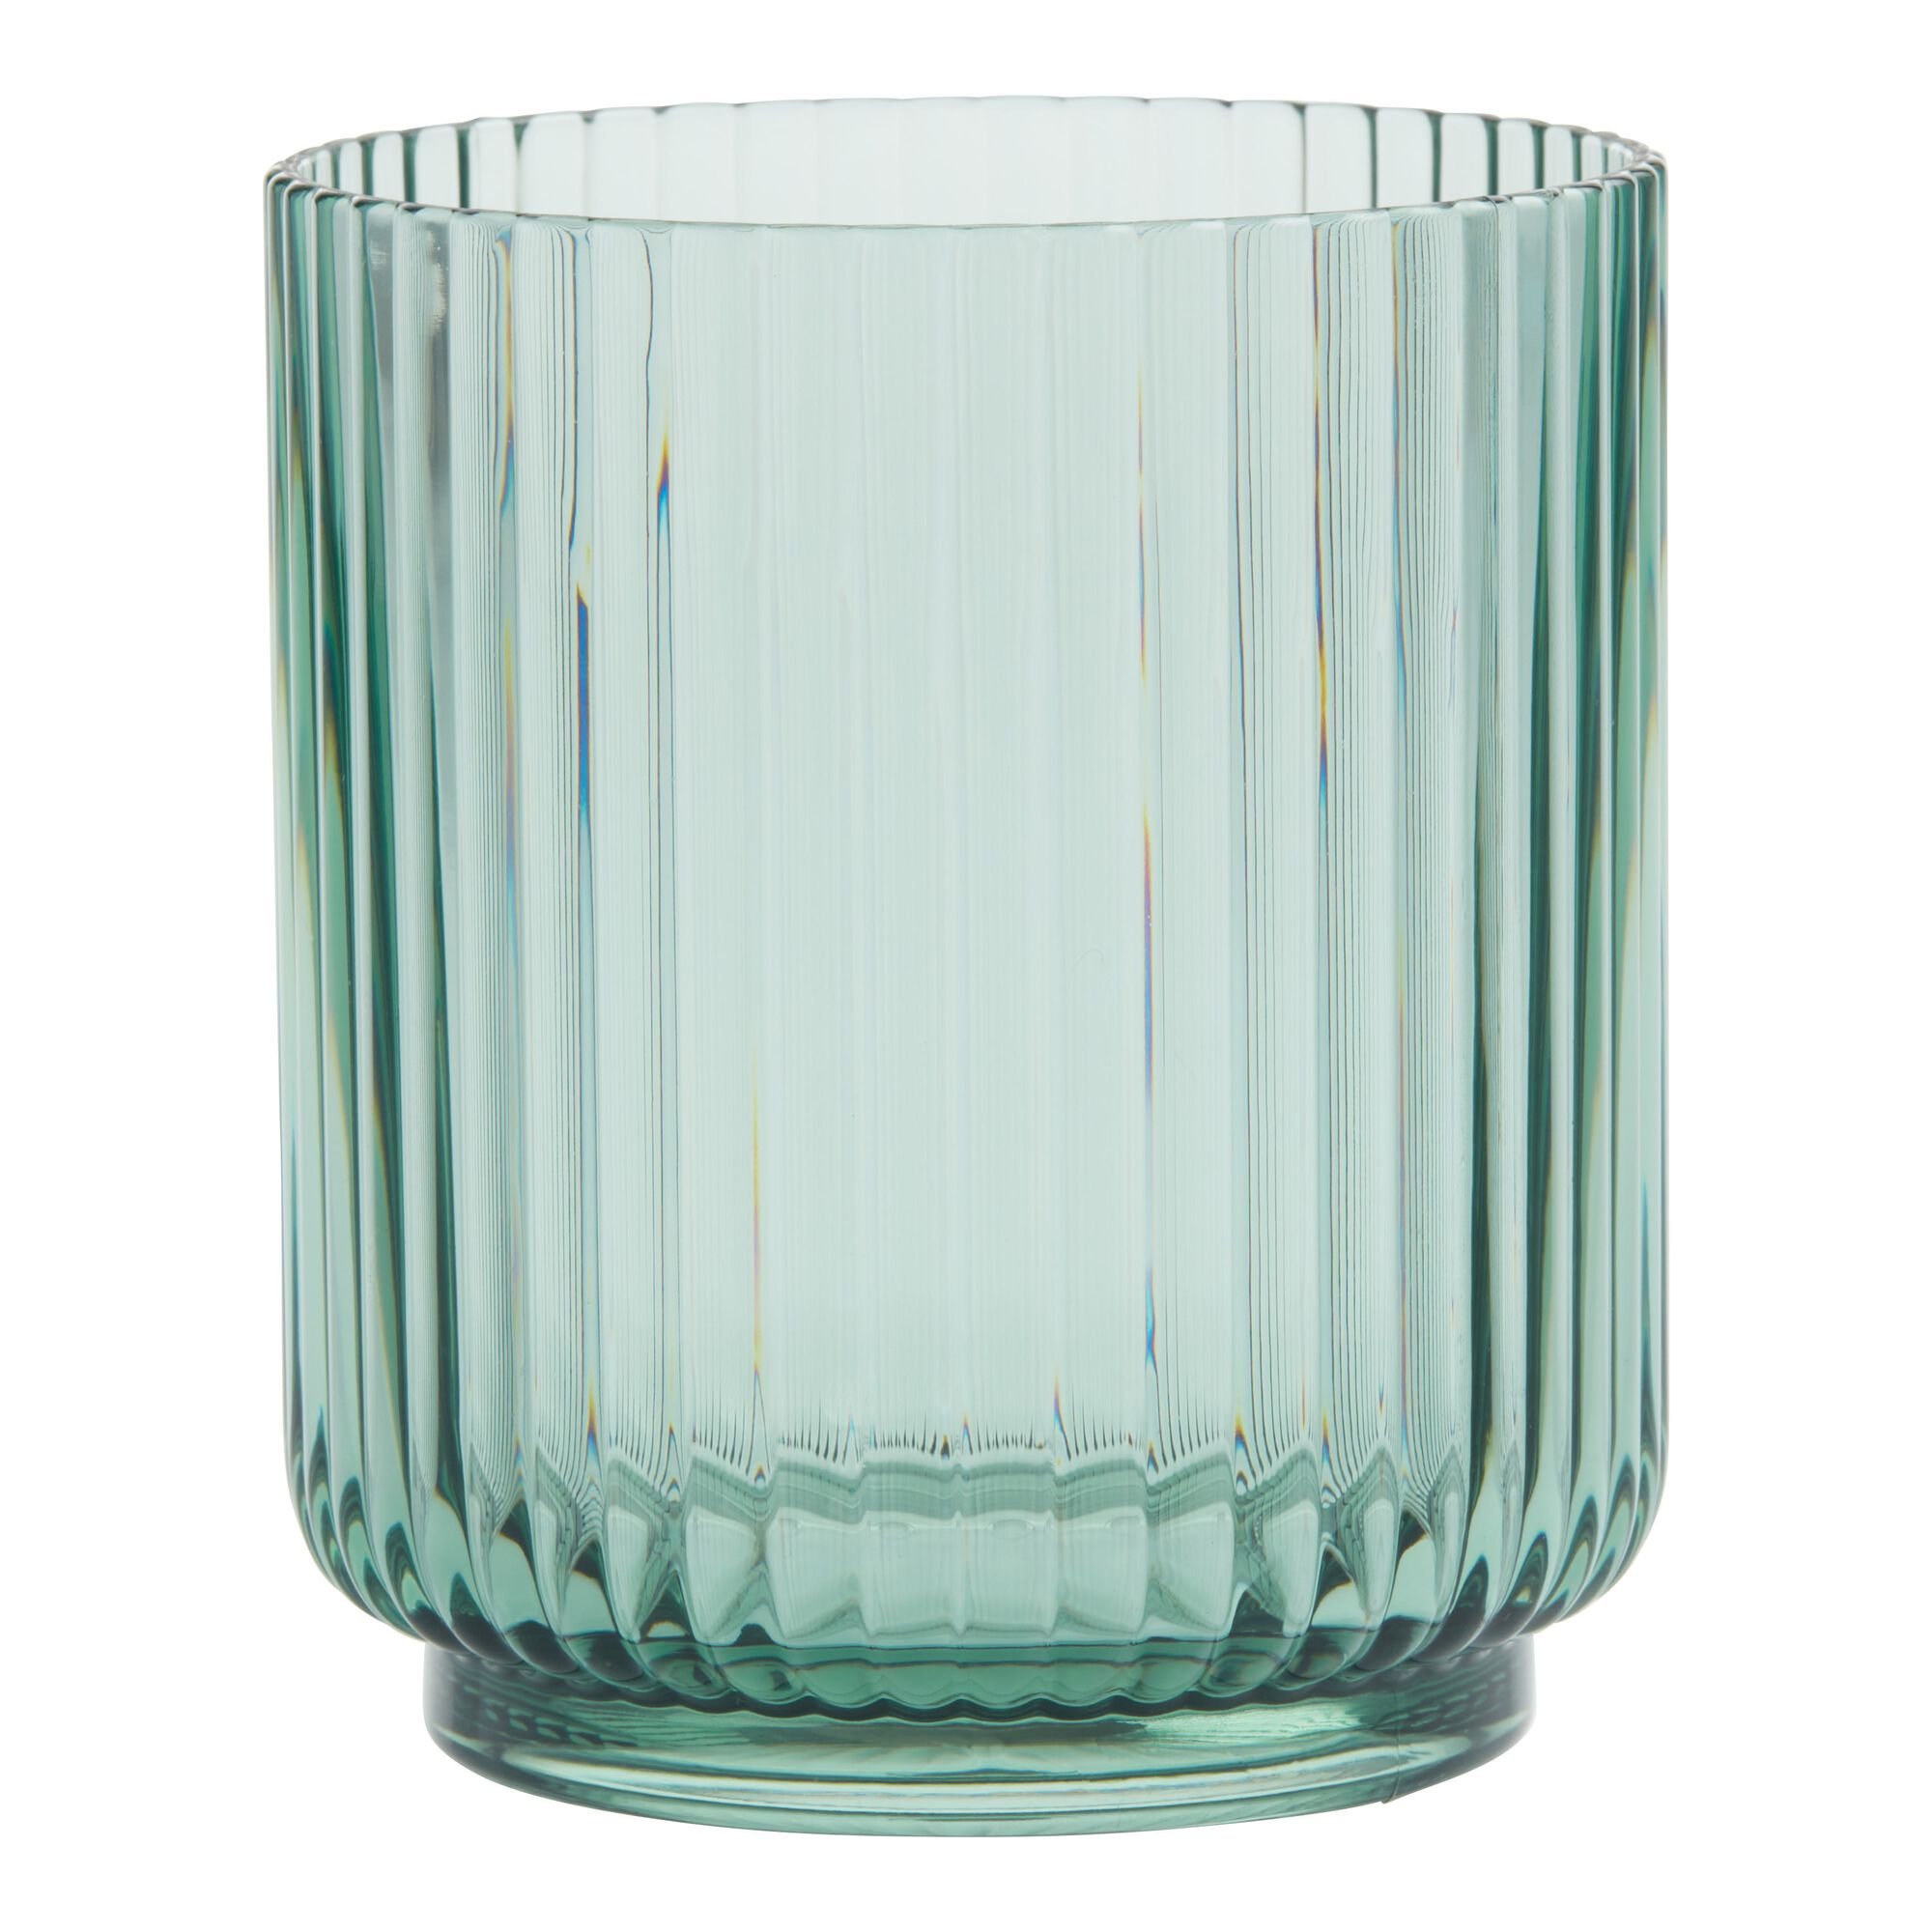 World Market - $4.99 - Mesa Green Ribbed Acrylic Double Old Fashioned Glass